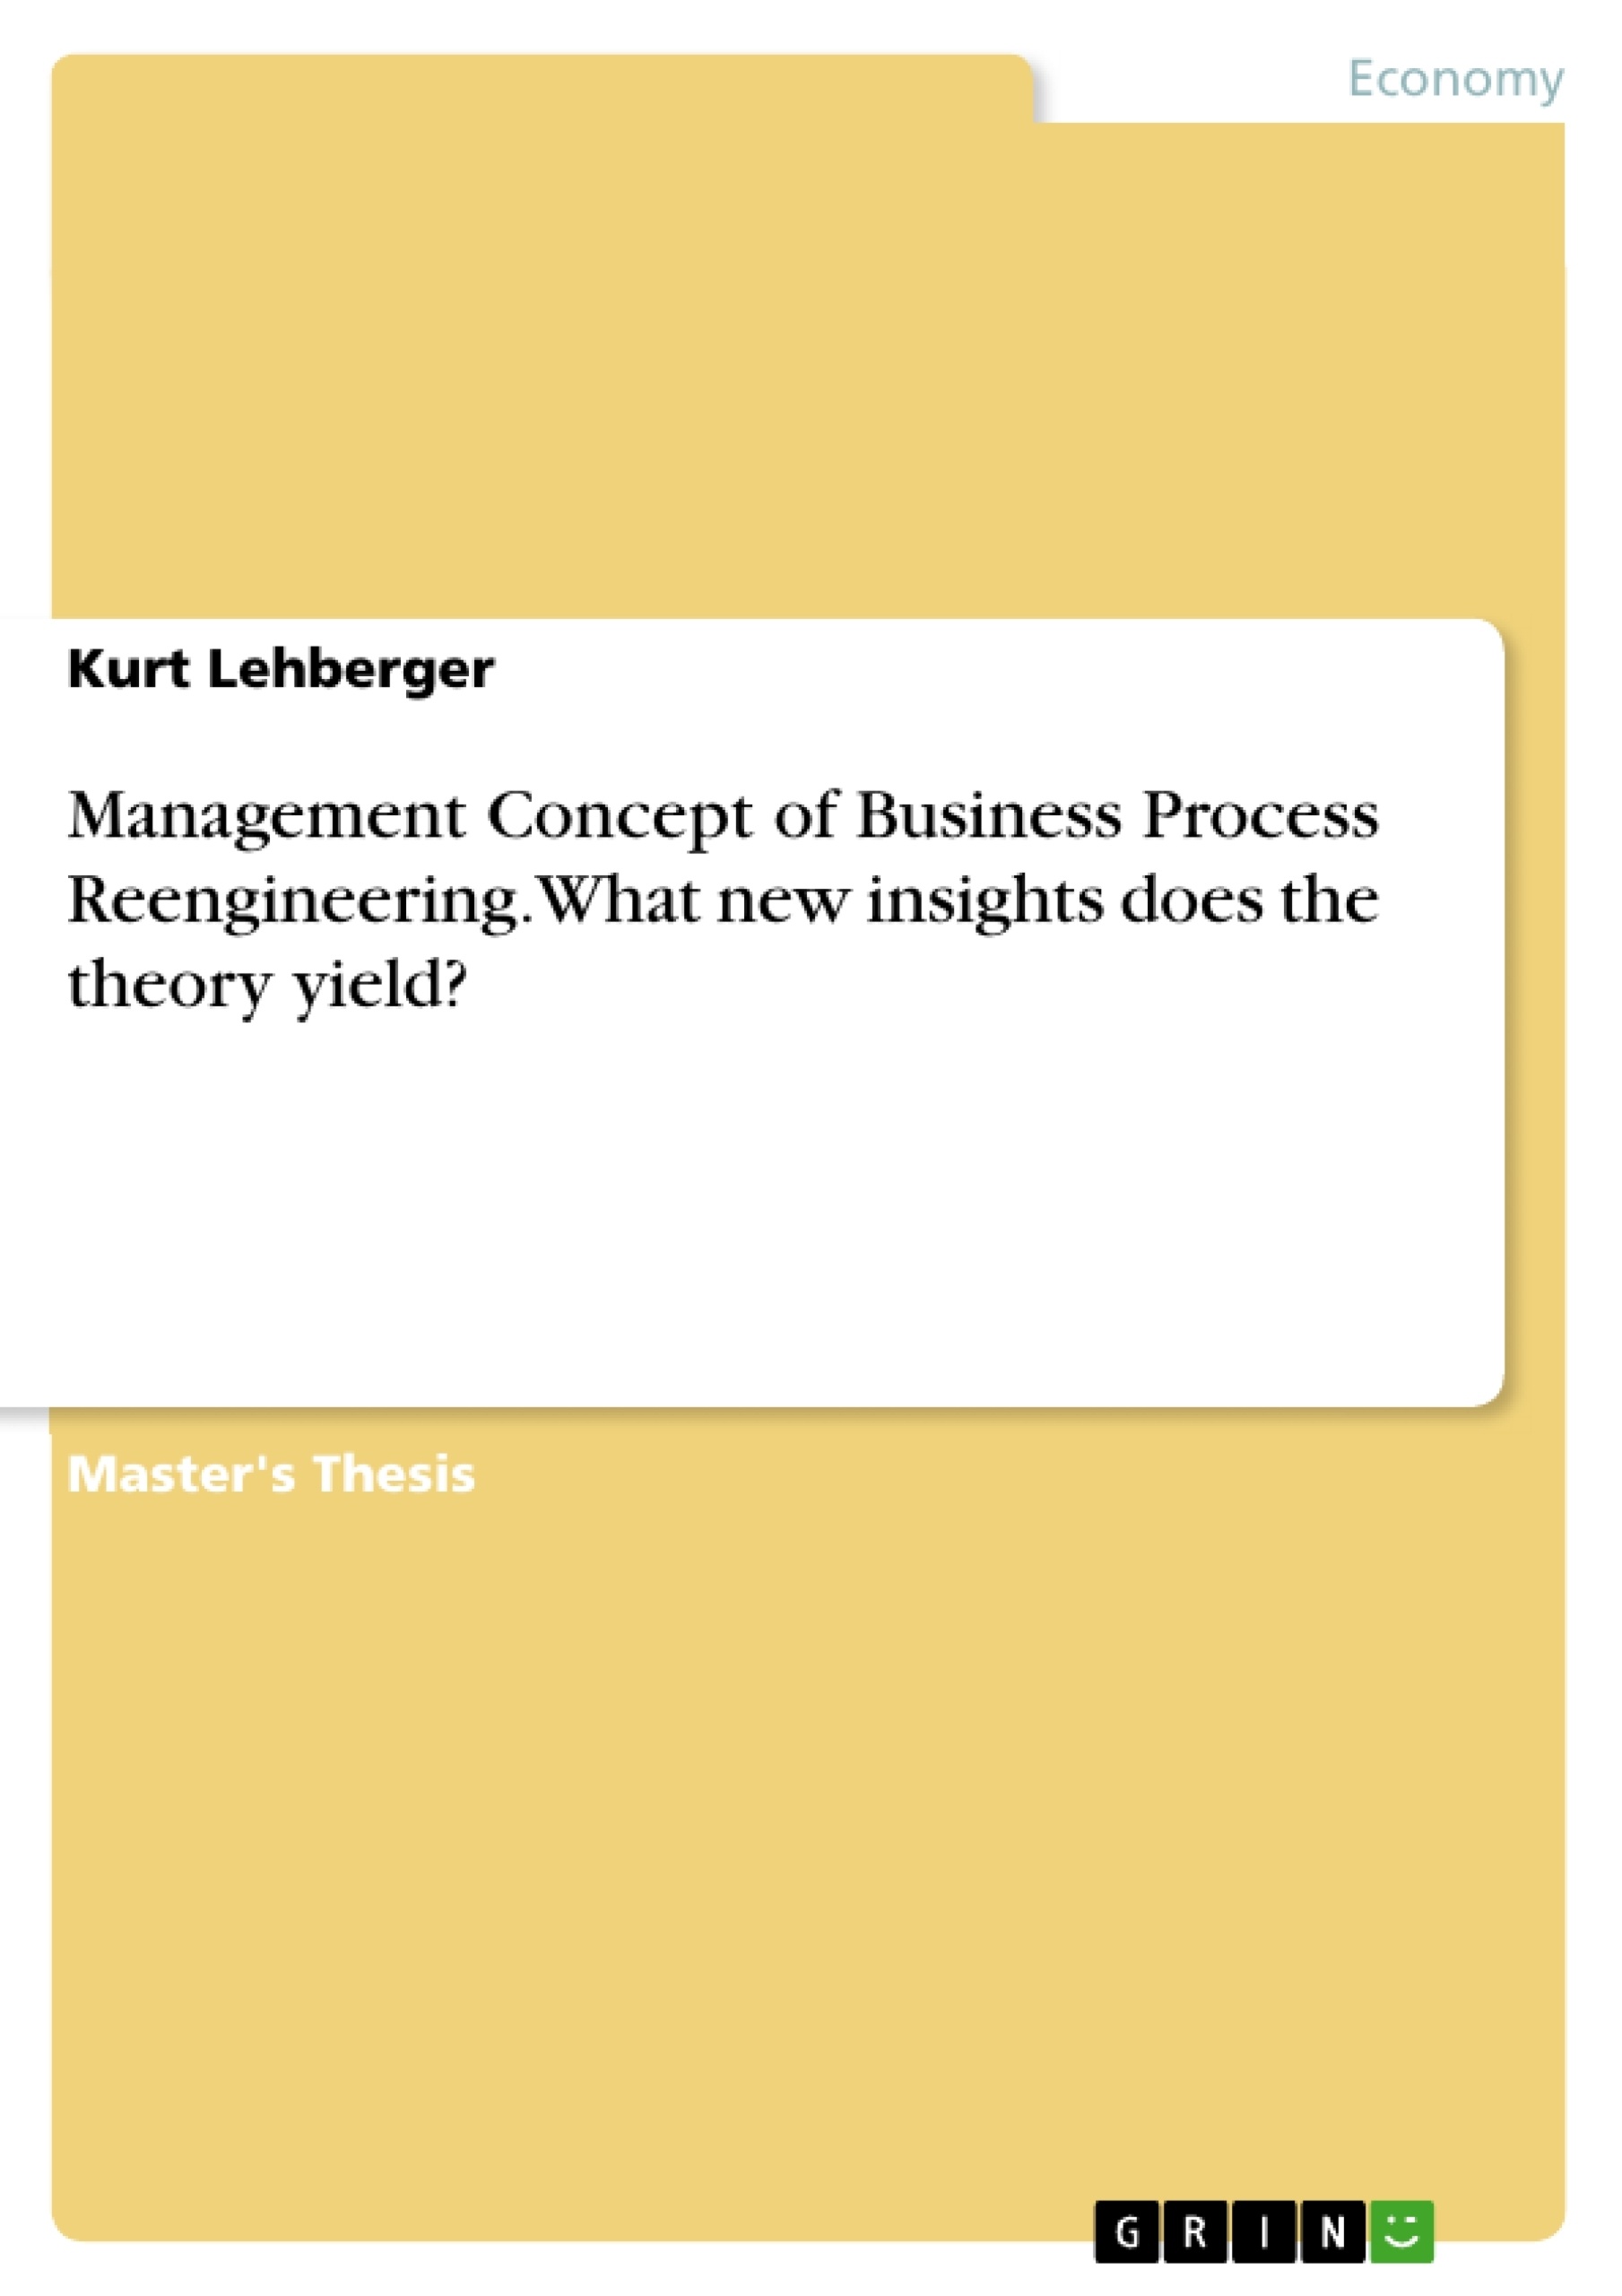 Title: Management Concept of Business Process Reengineering. What new insights does the theory yield?